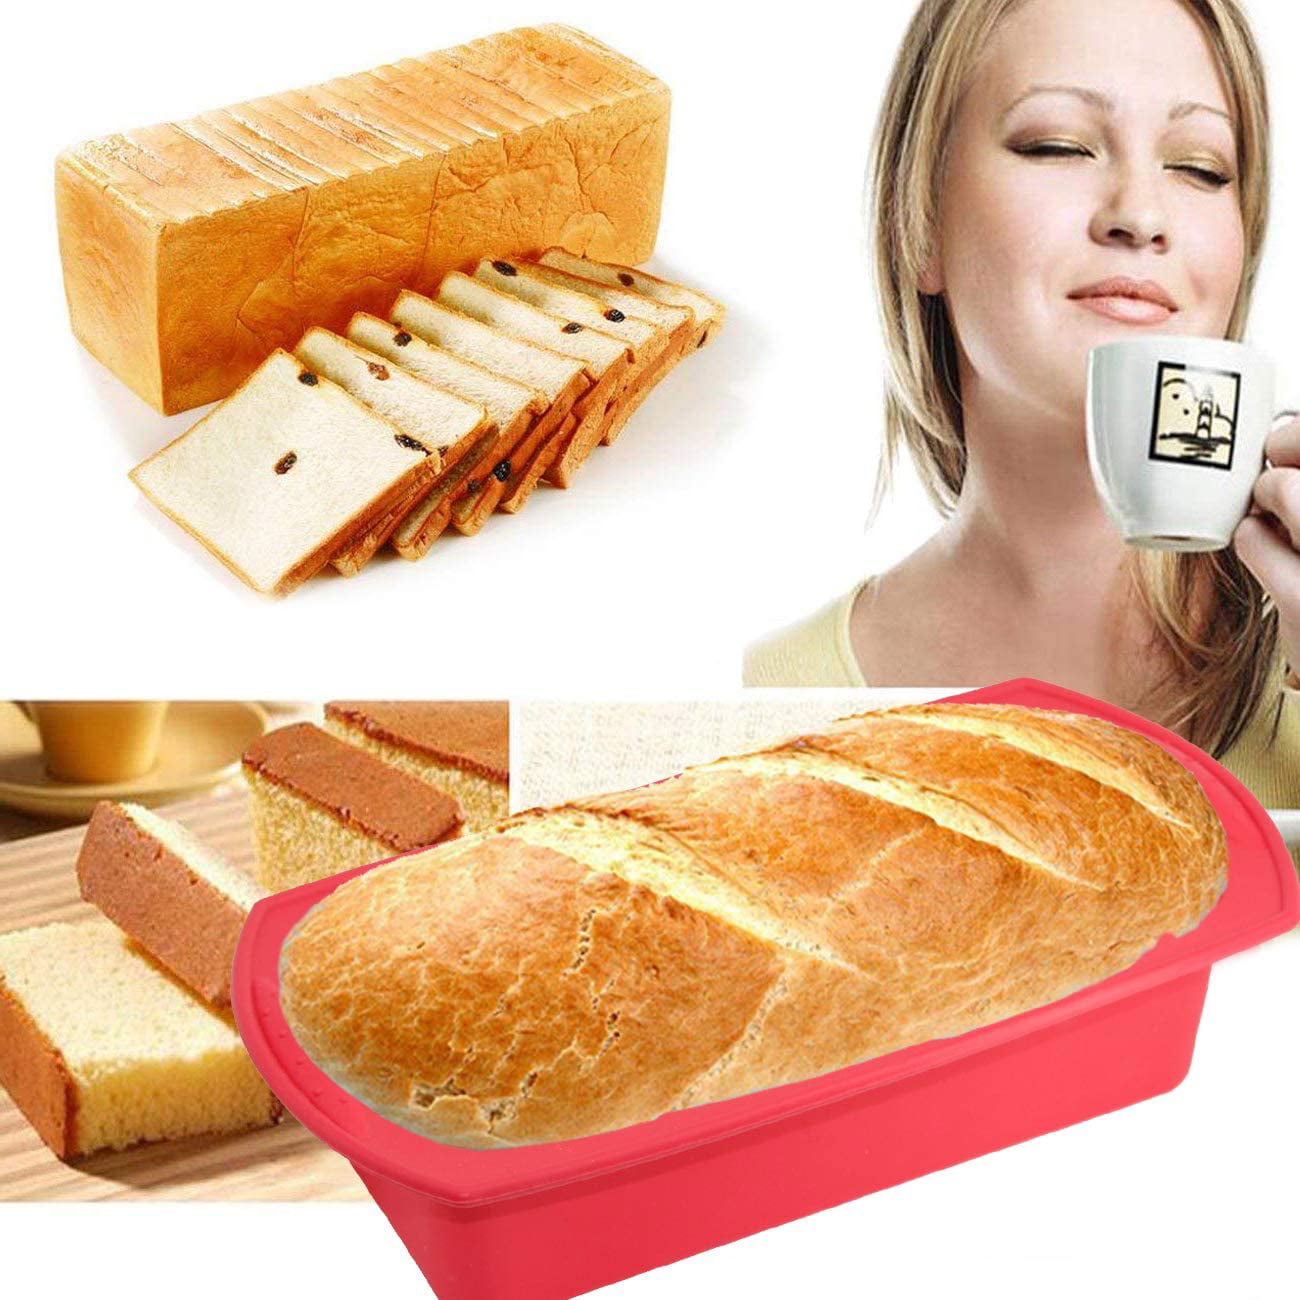 Chicrinum Silicone Bread Loaf Pan, Non-Stick Food Grade Silicone Baking  Mold, Meatloaf Pan with Metal Reinforced Frame More Strength